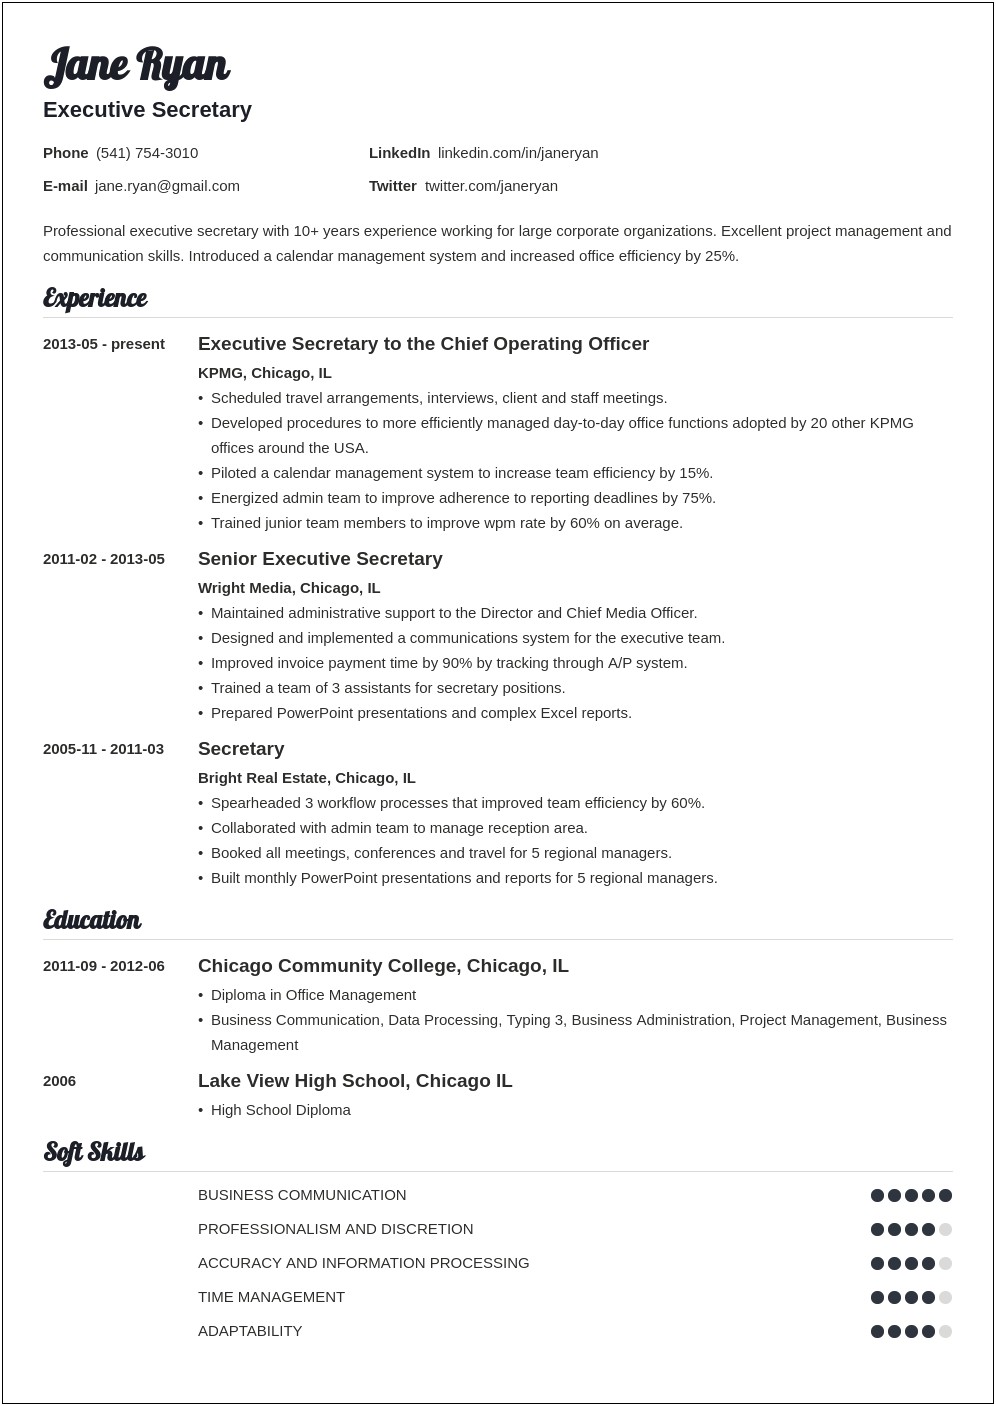 Resume Objective For School Receptionist